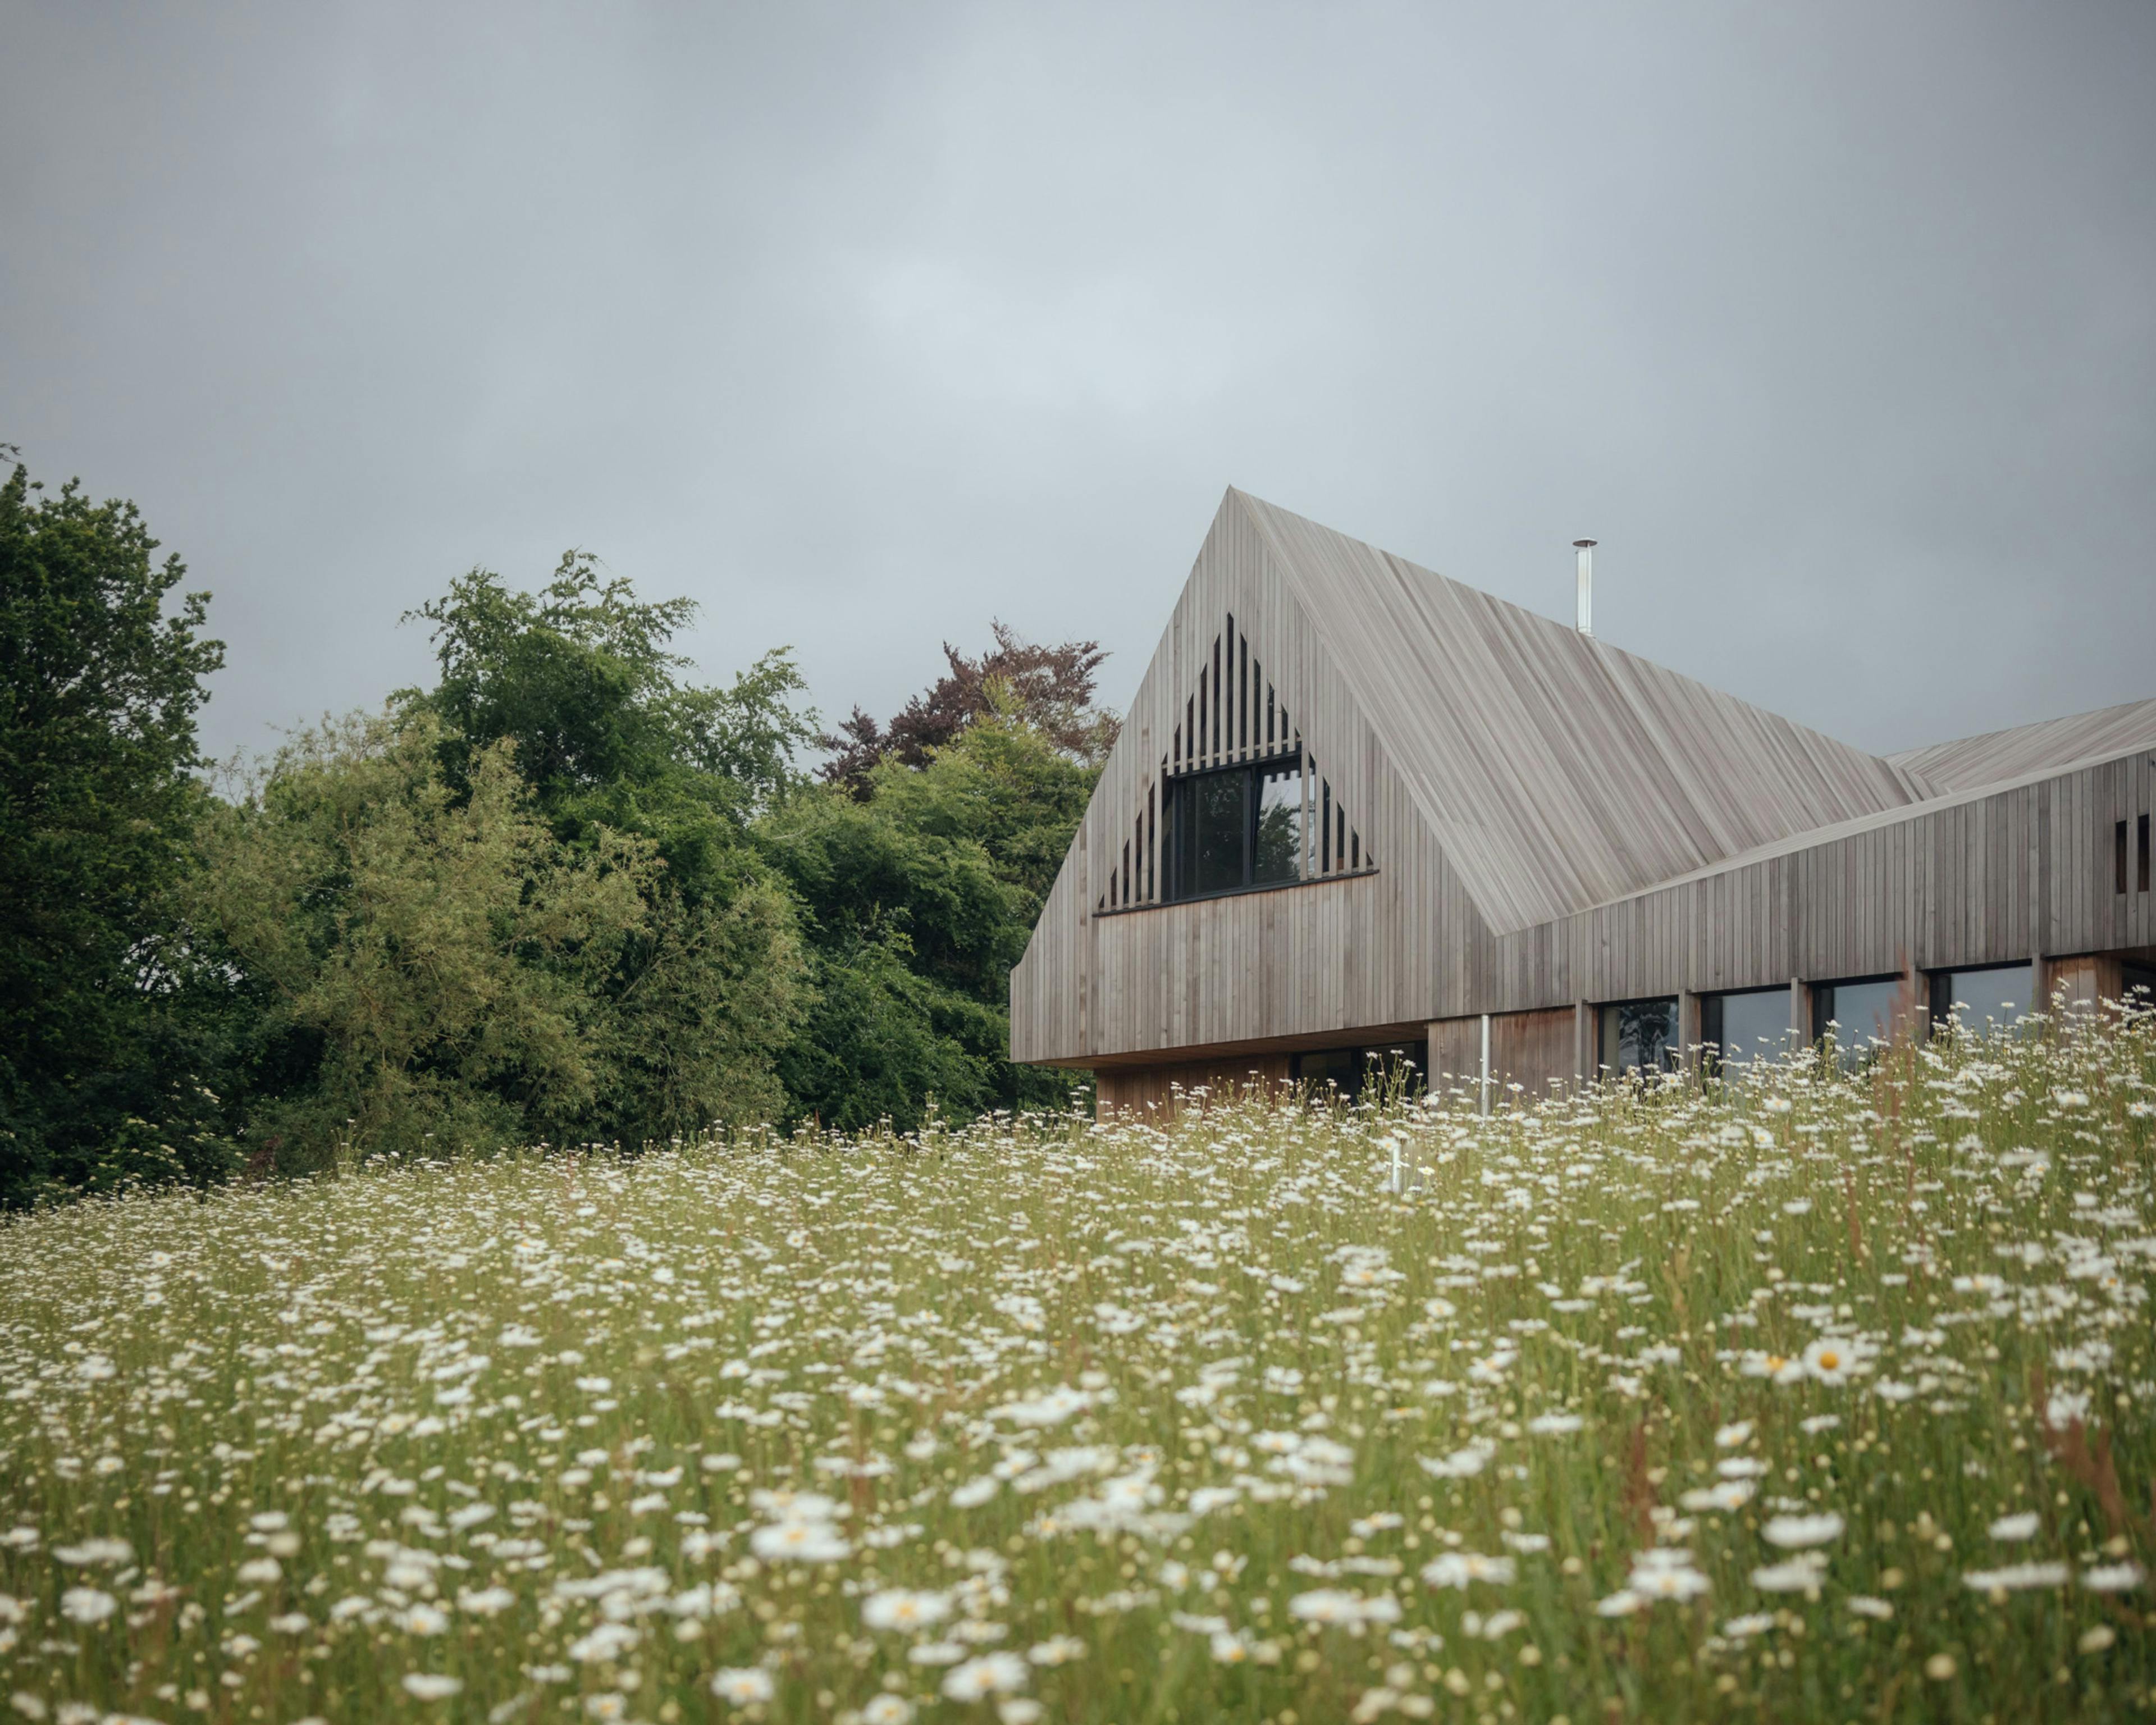 A modern off-grid family home for London leavers moving back to the family farm